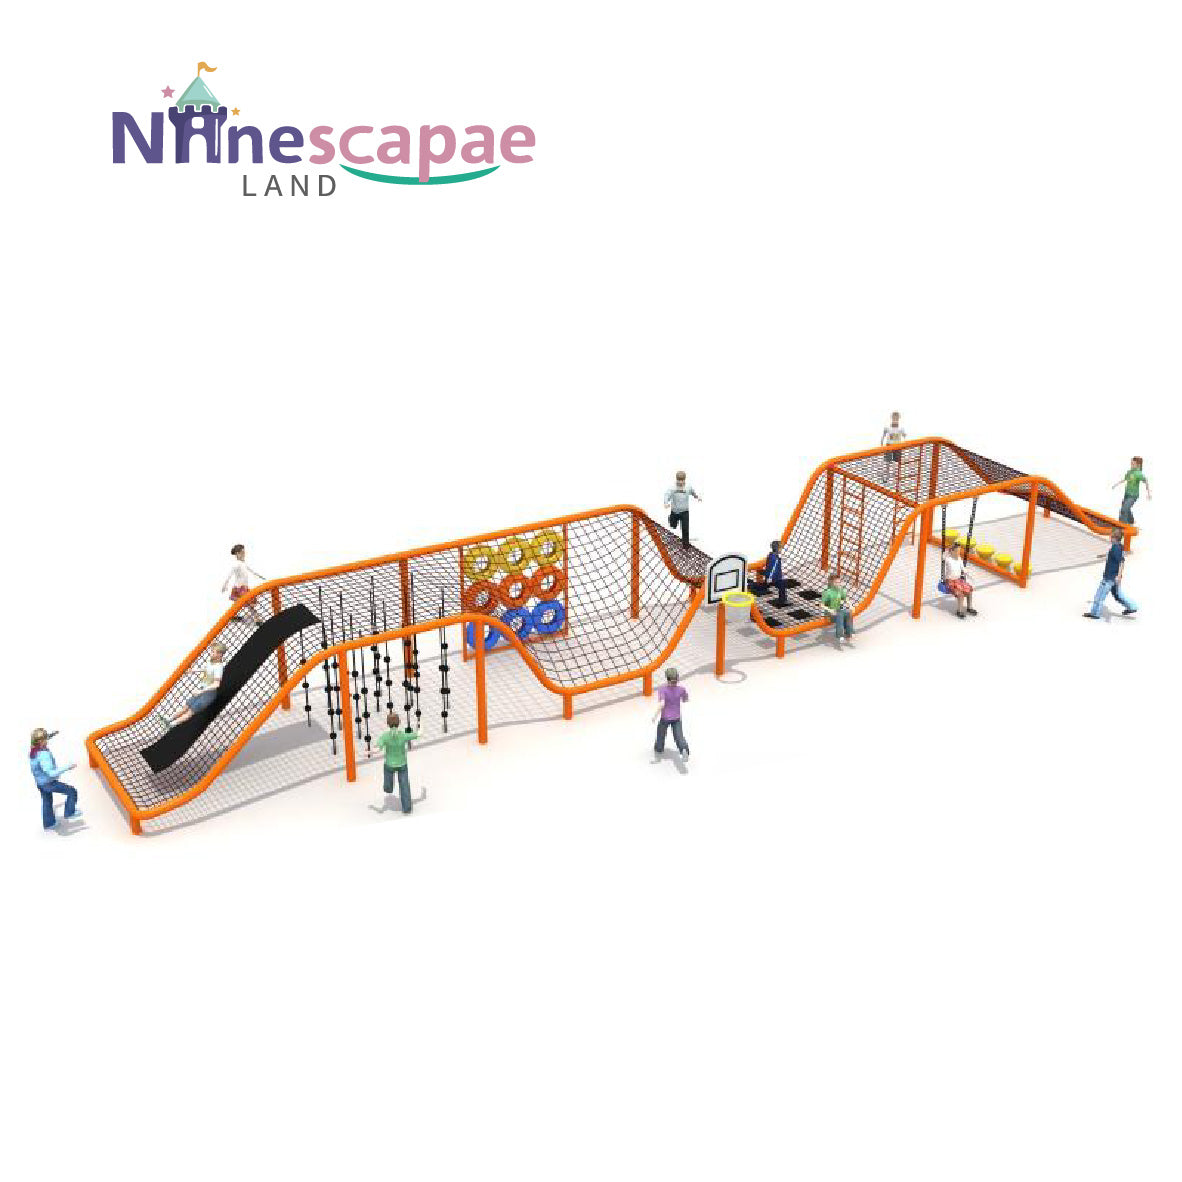 Wholesale Obstacle Course Playground Equipment - NinescapeLand